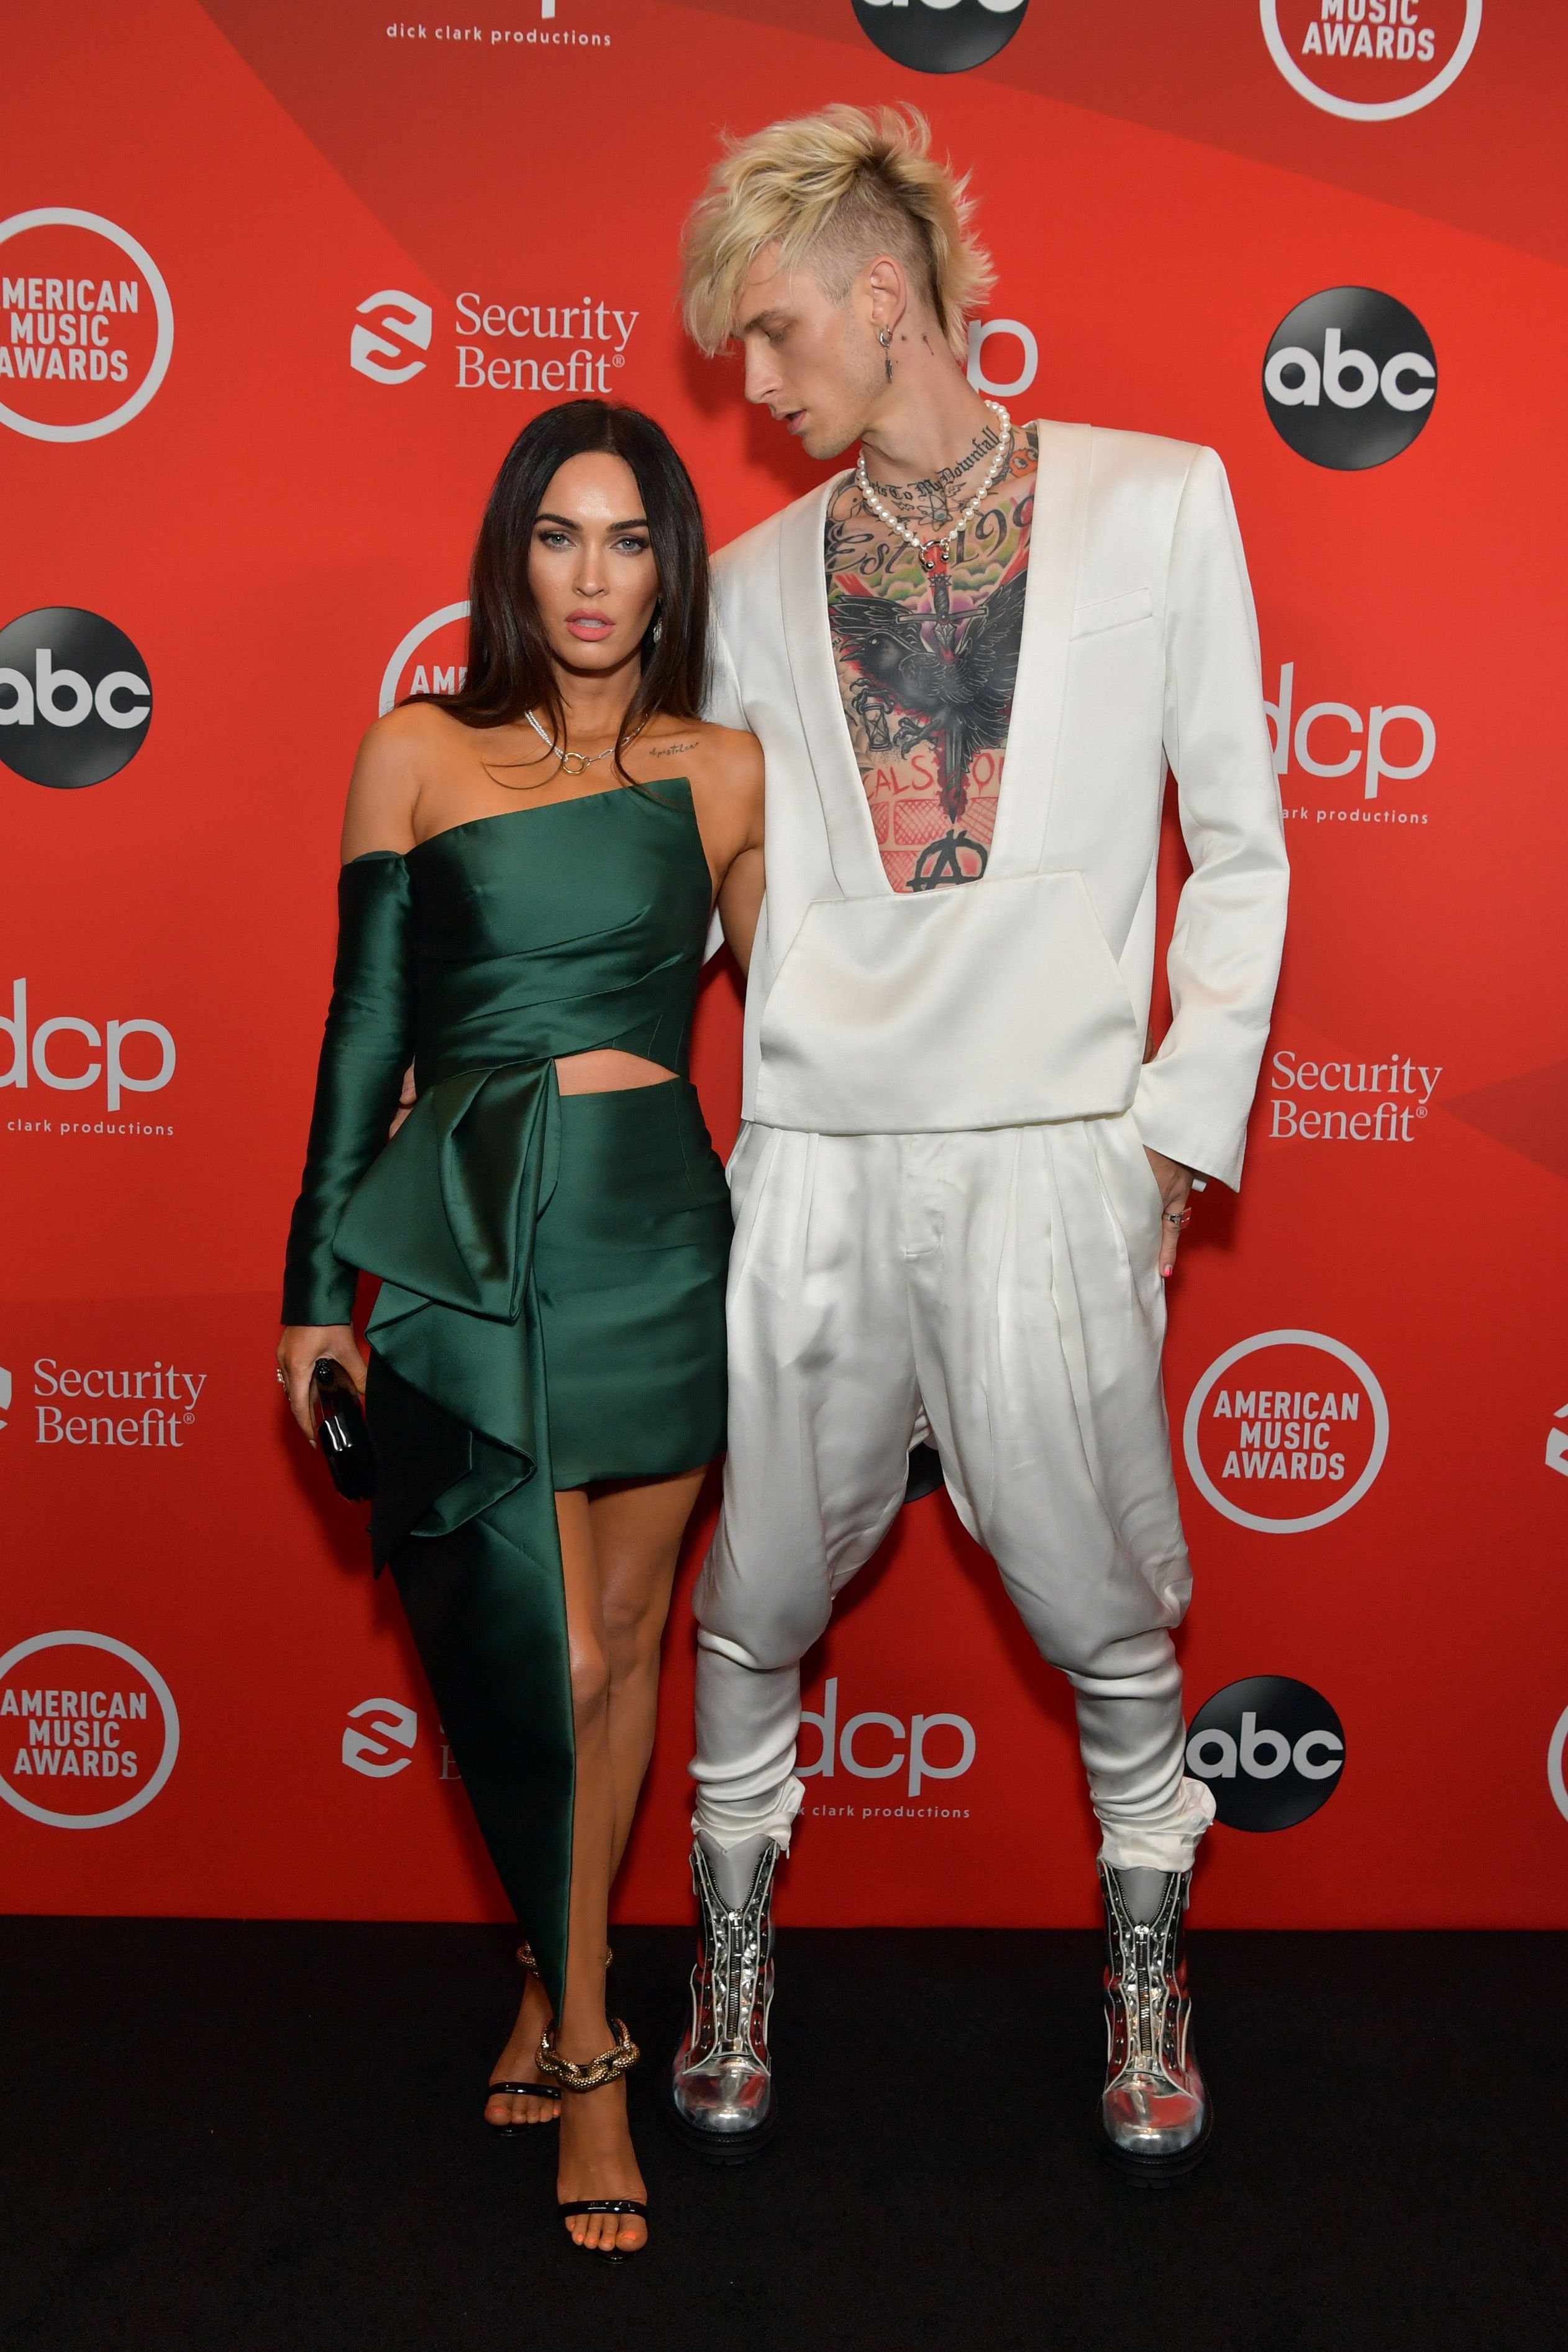 Megan Fox and Machine Gun Kelly attend the 2020 American Music Awards at Microsoft Theater on November 22, 2020 in Los Angeles, California. | Source: Getty Images